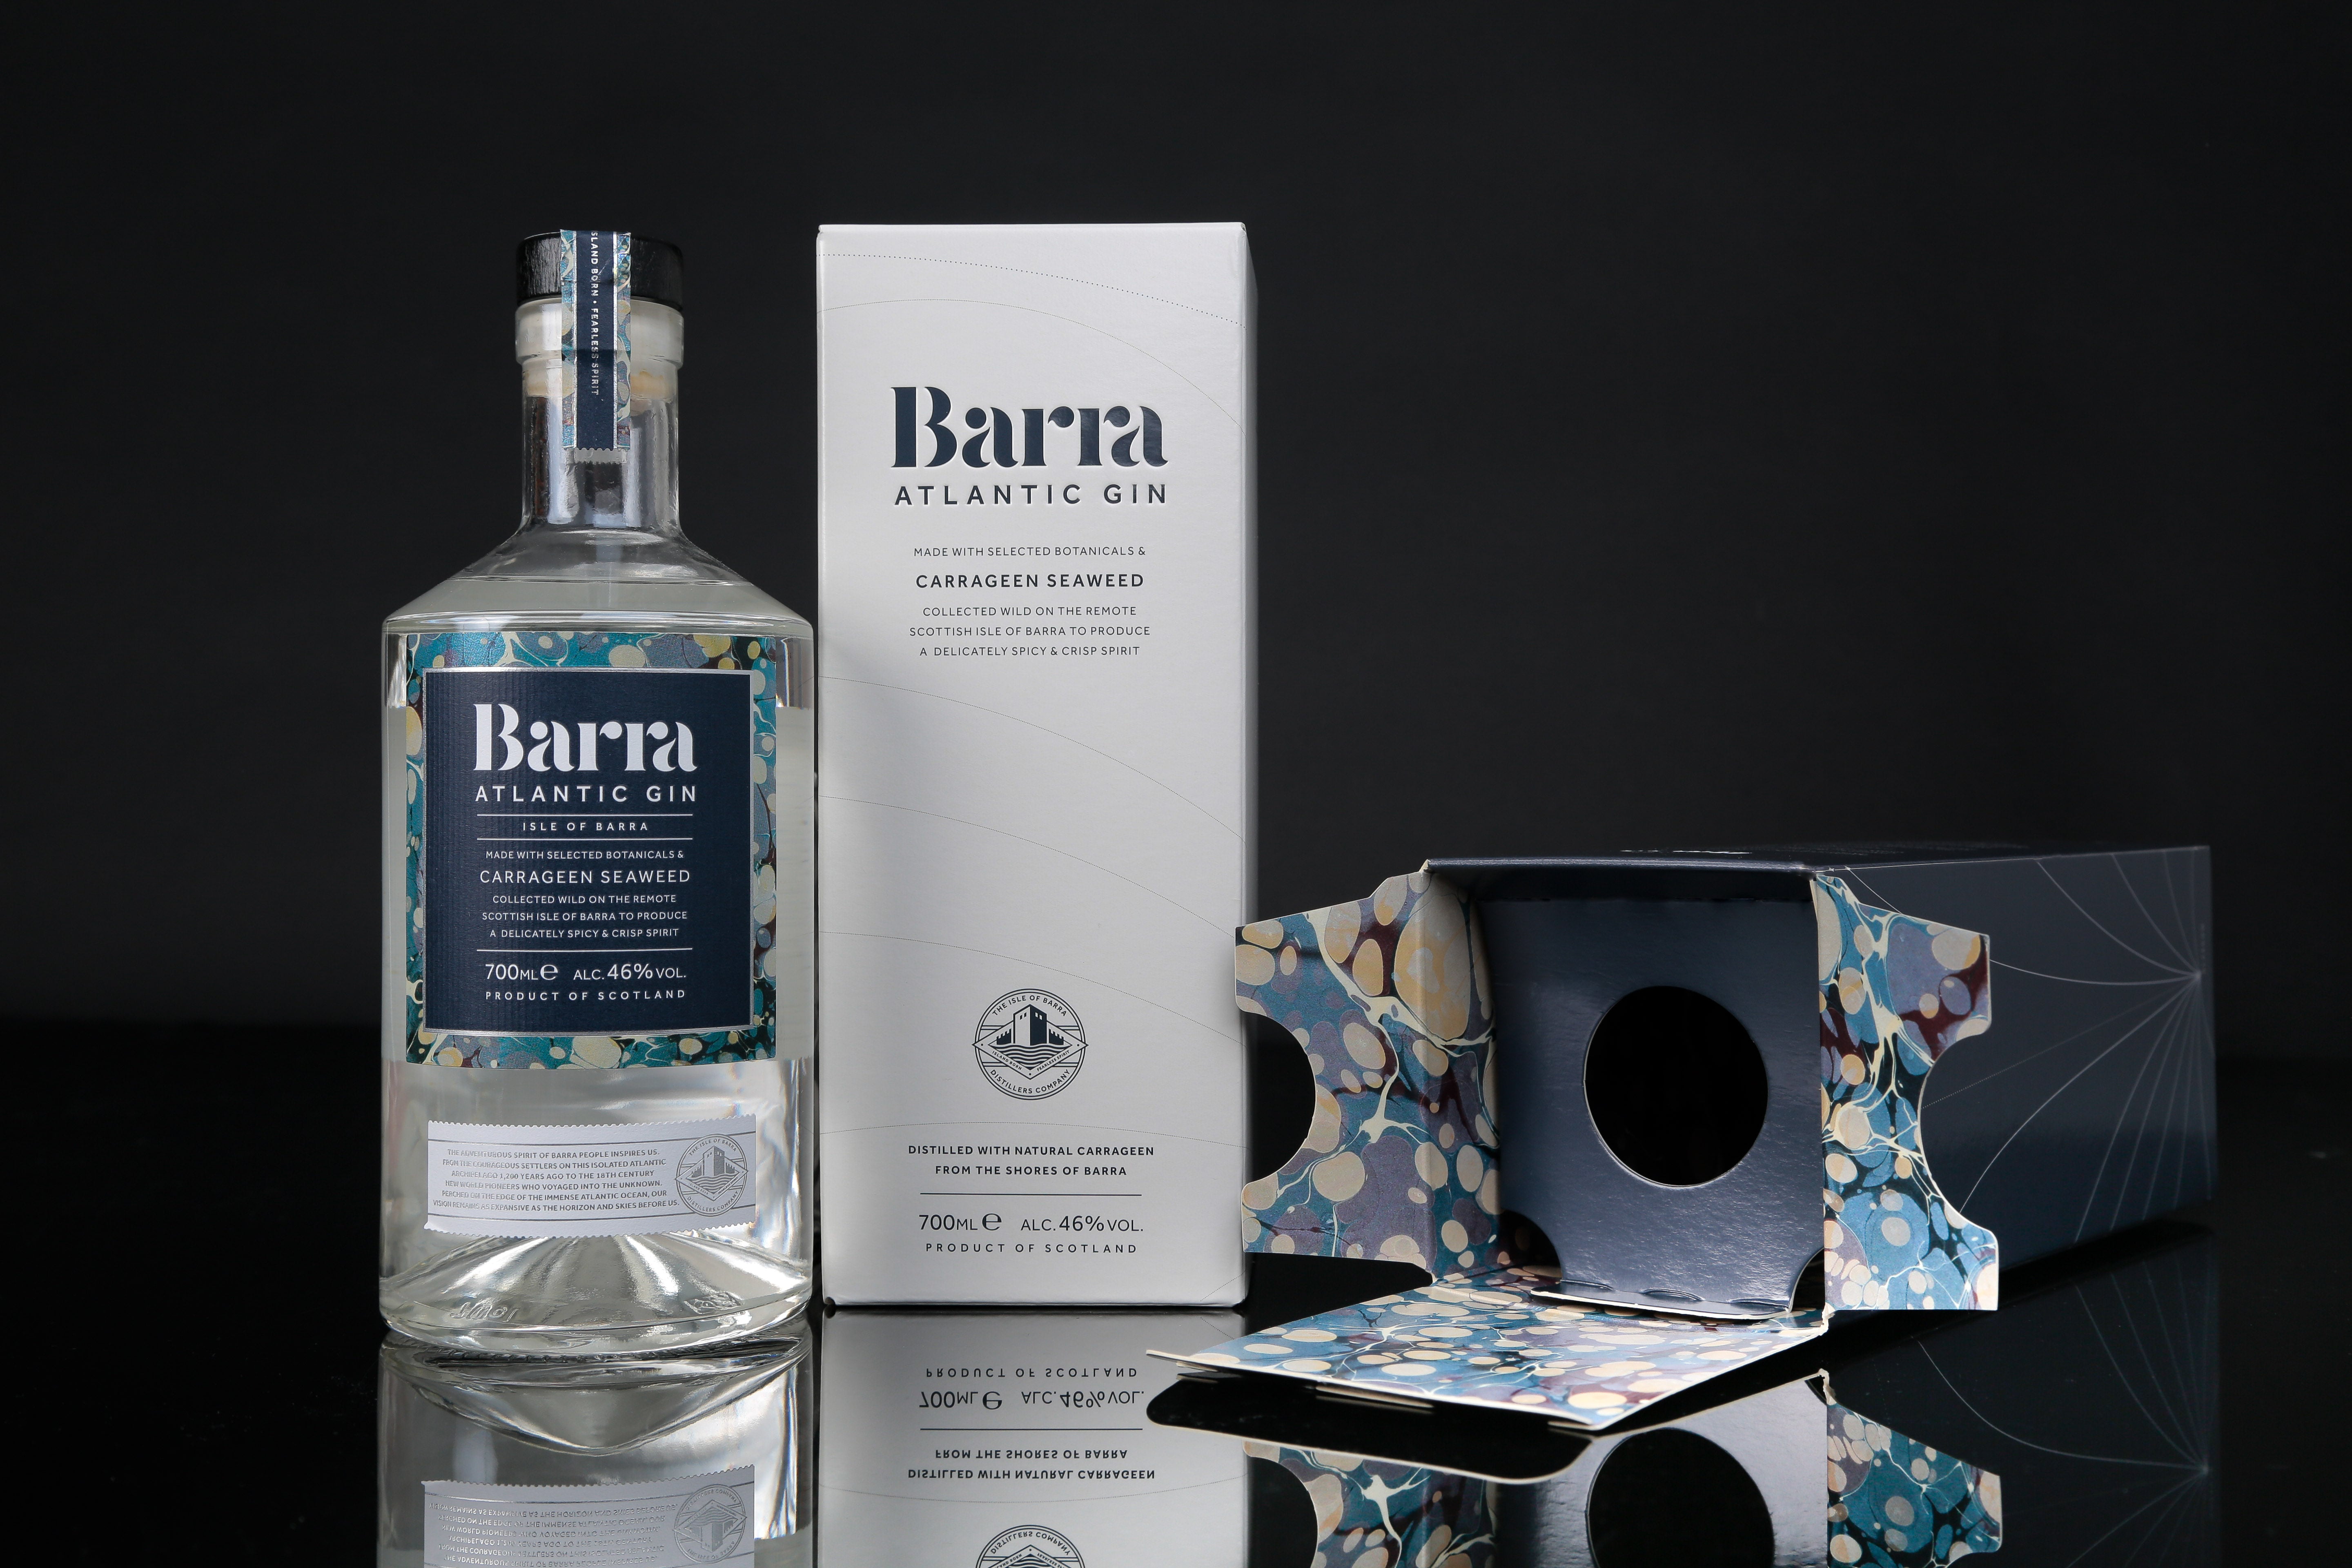 Barra Atlantic Gin bottle and white box packaging which helping sales increase